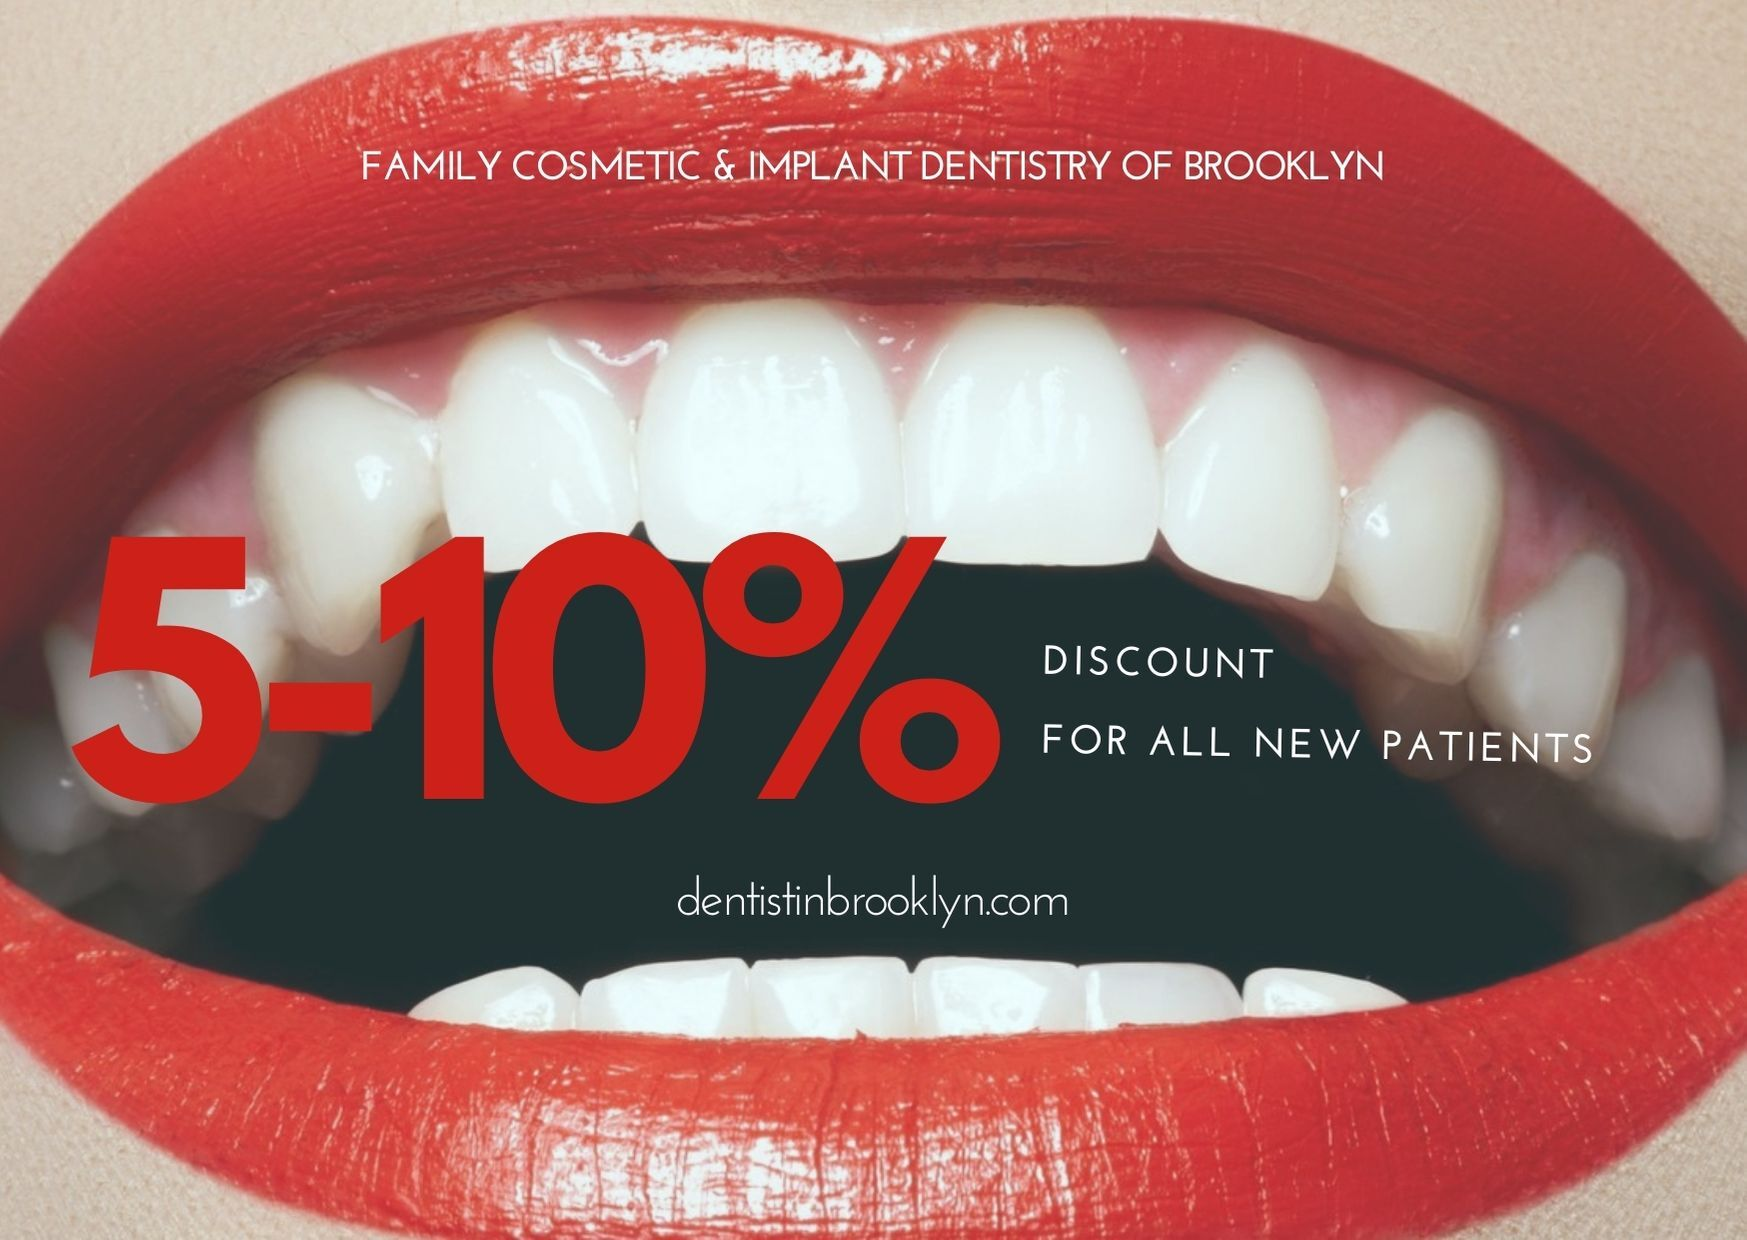 Family Cosmetic and Implant Dentistry offers a discount'